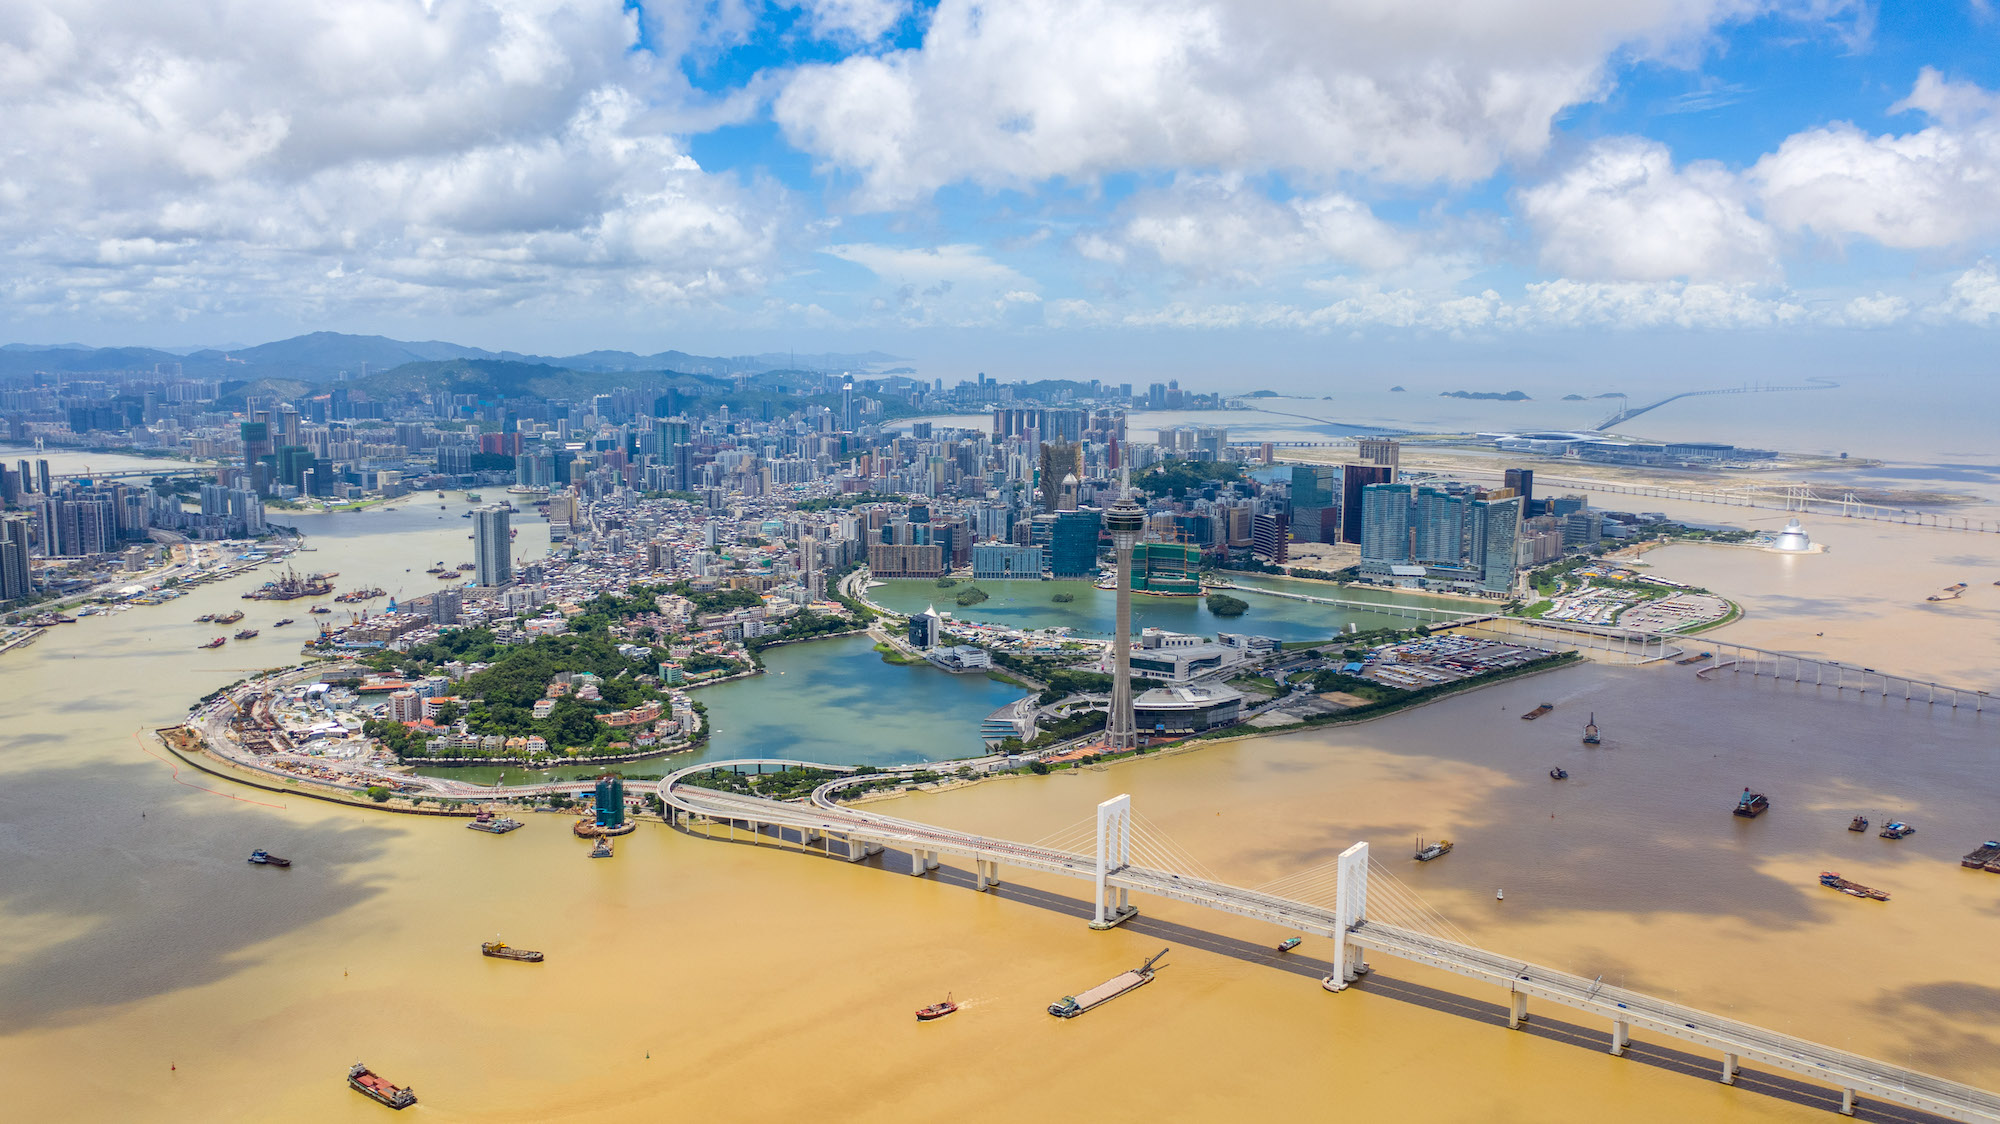 Expert calls for balanced approach to Macao’s future development